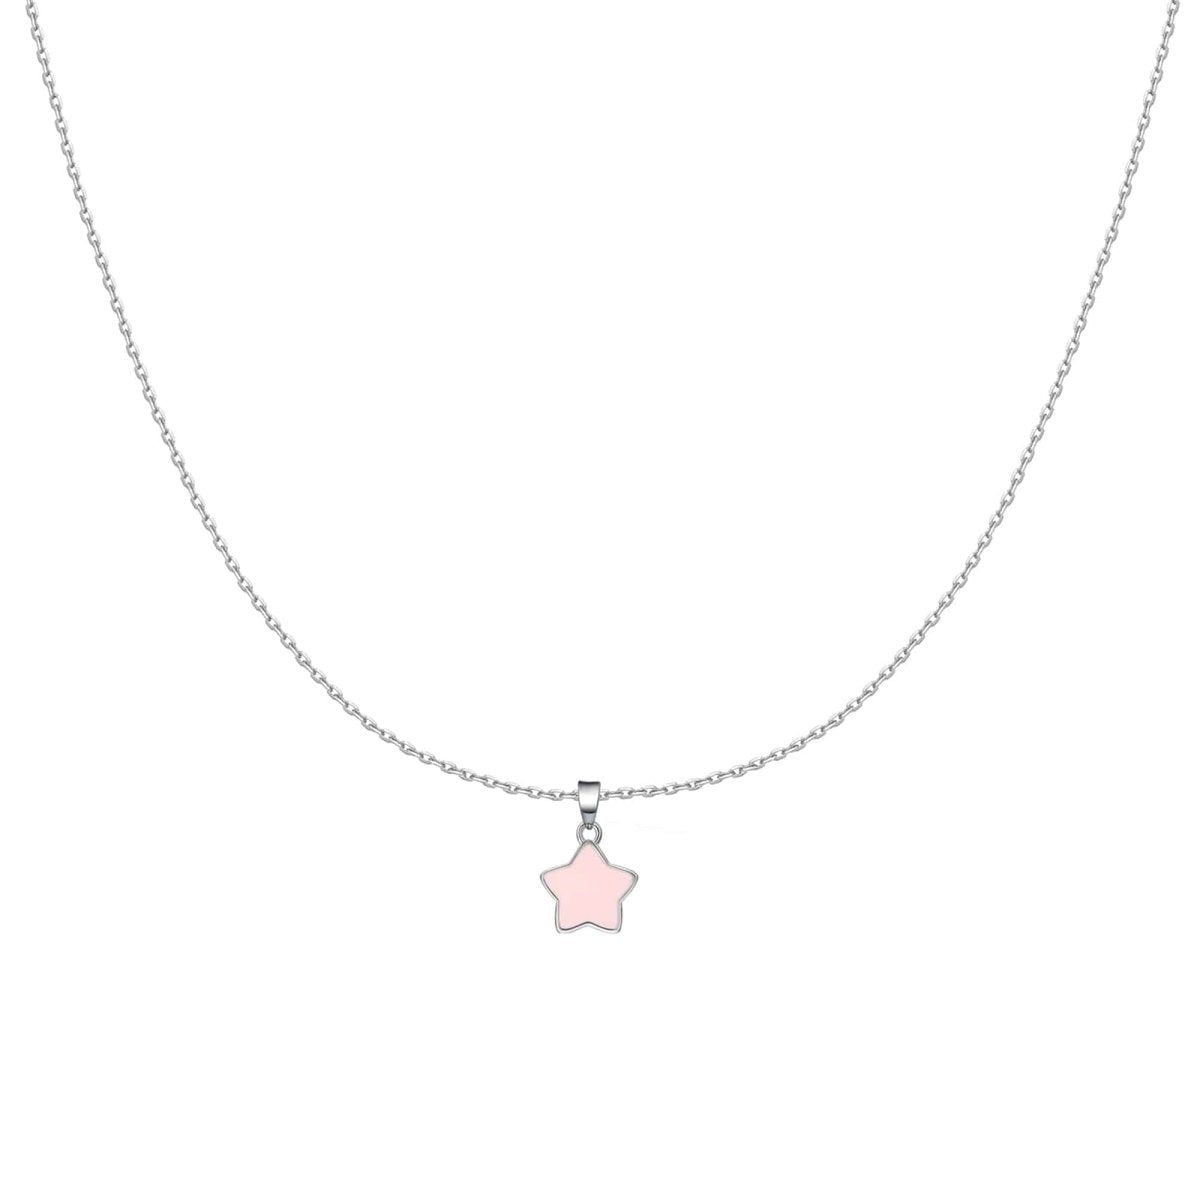 Óg go deo (Young forever) Star Necklace — Petite Boutique